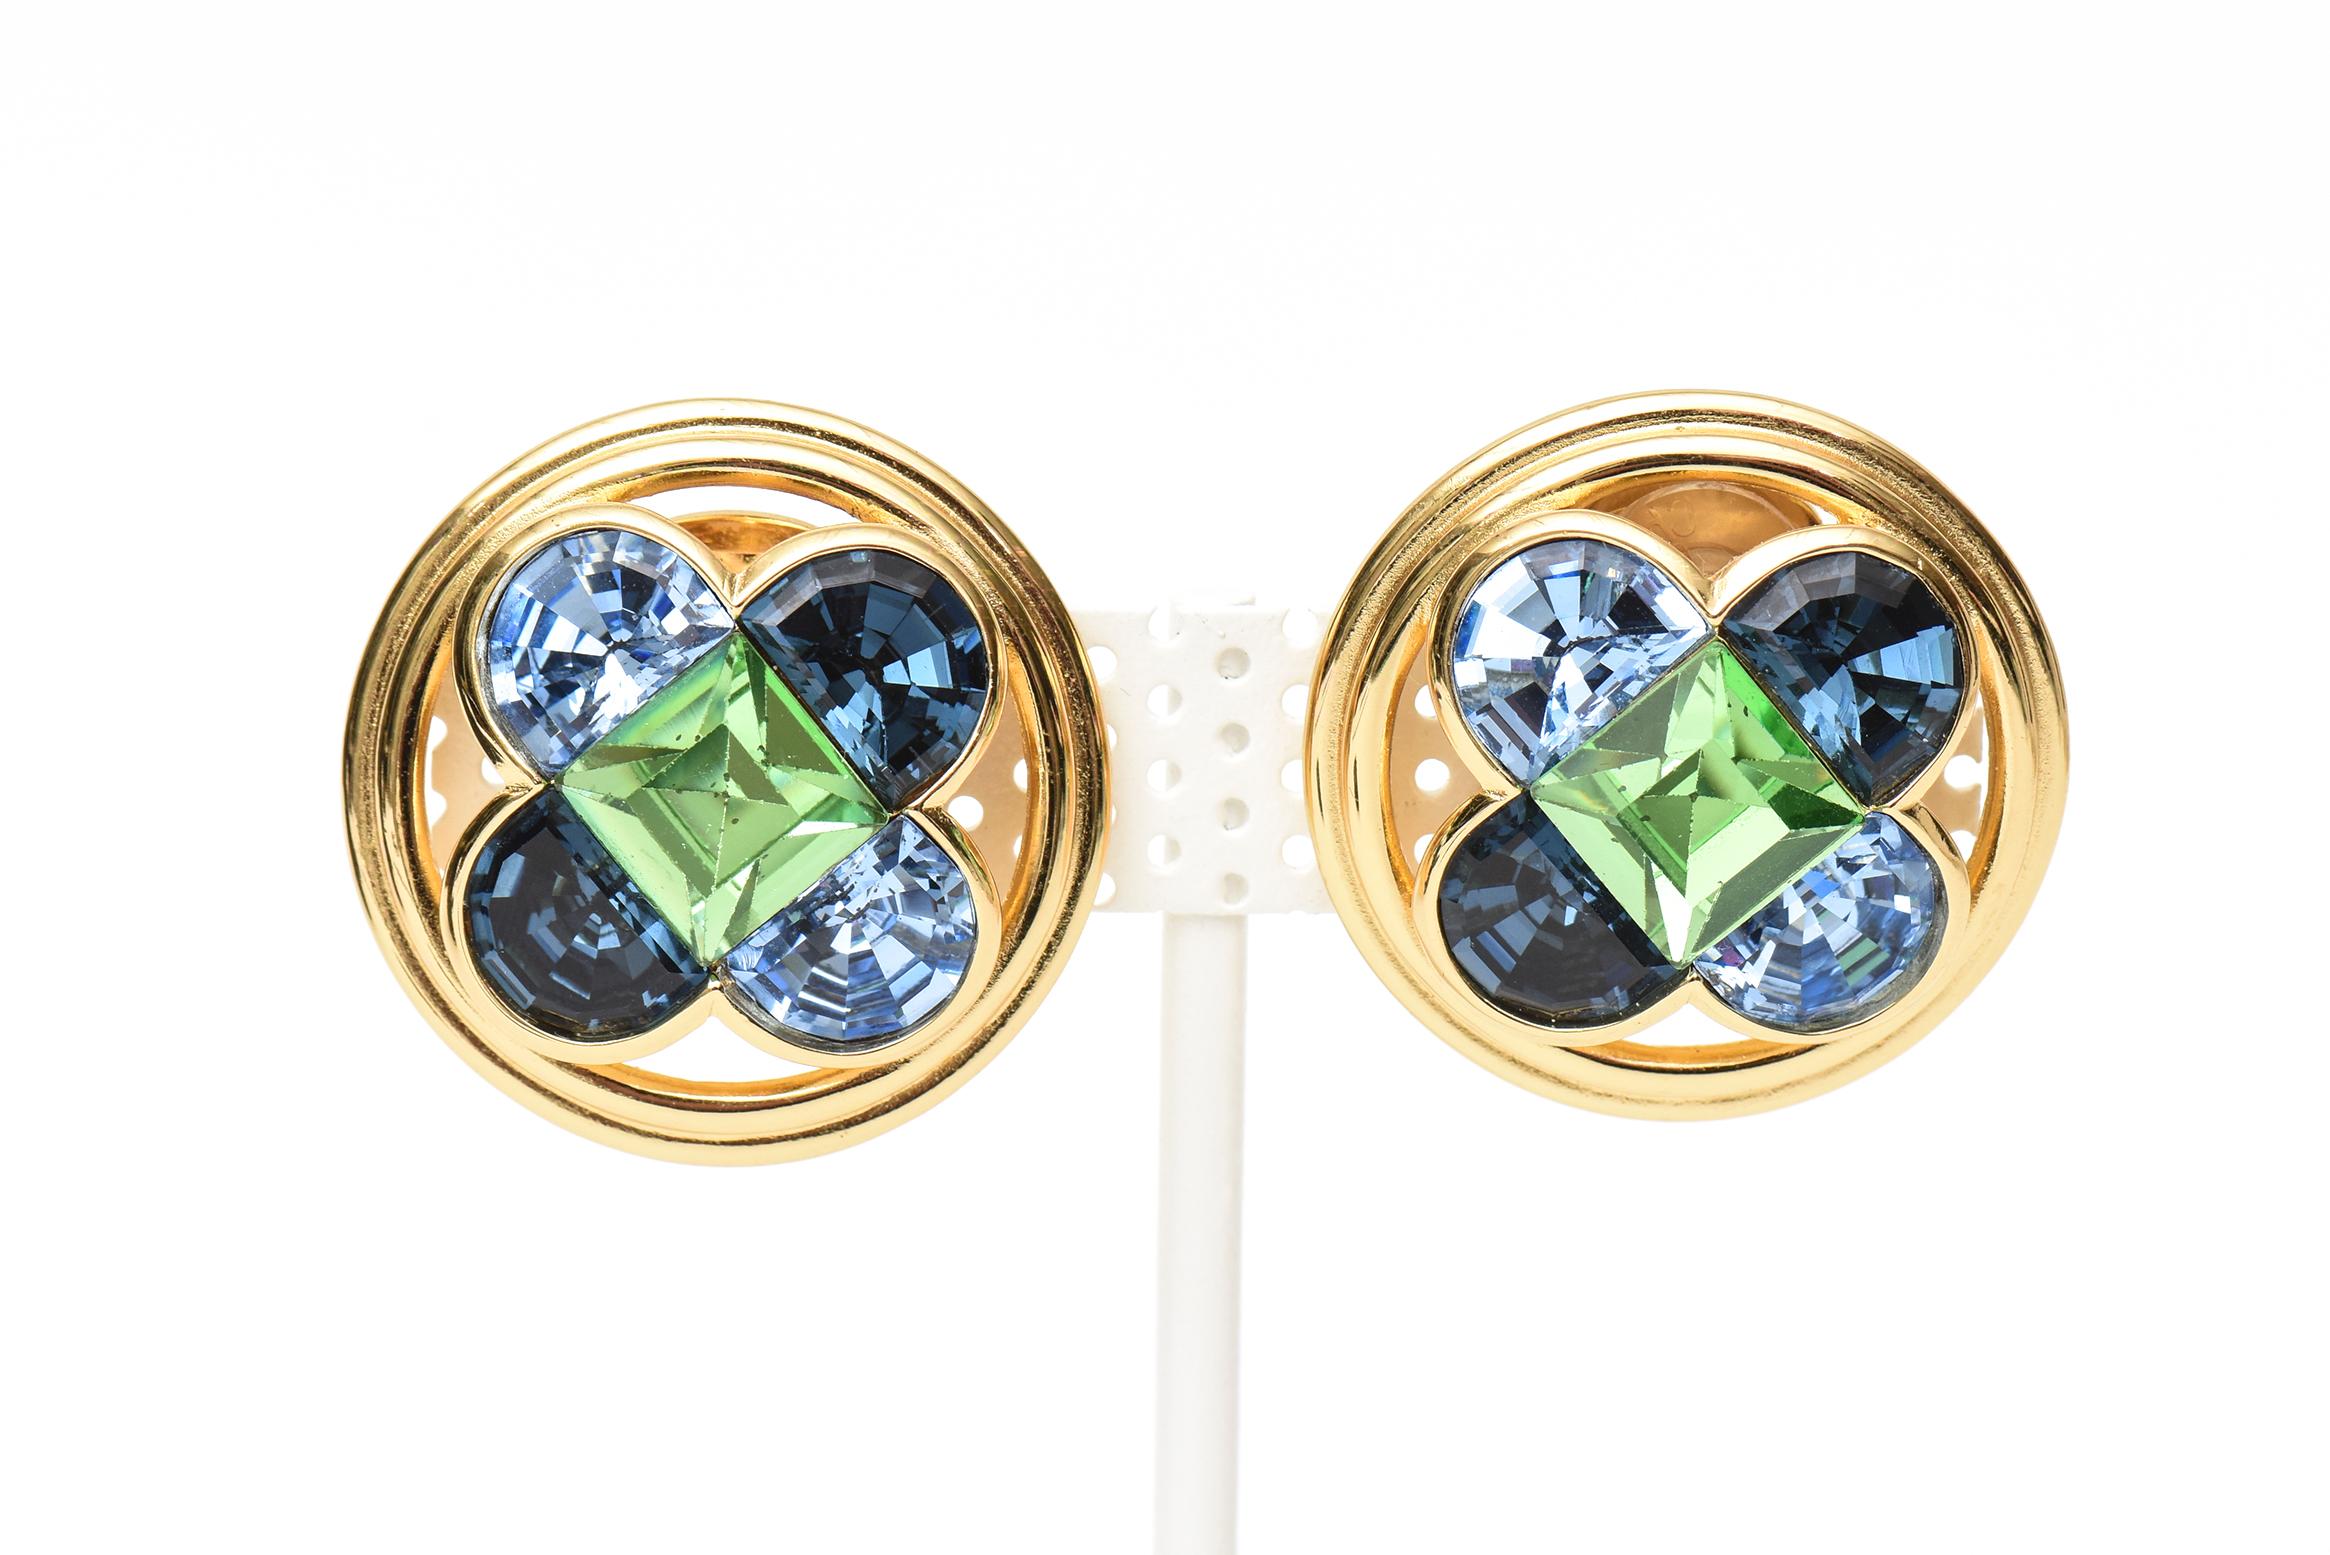 These very 80's round button clip on Christian Dior pair of earrings are a beautiful combination colors of green and blue crystals set against a gold tone background. They are perfect for all the seasons of 2023. They are marked Christian Dior. They